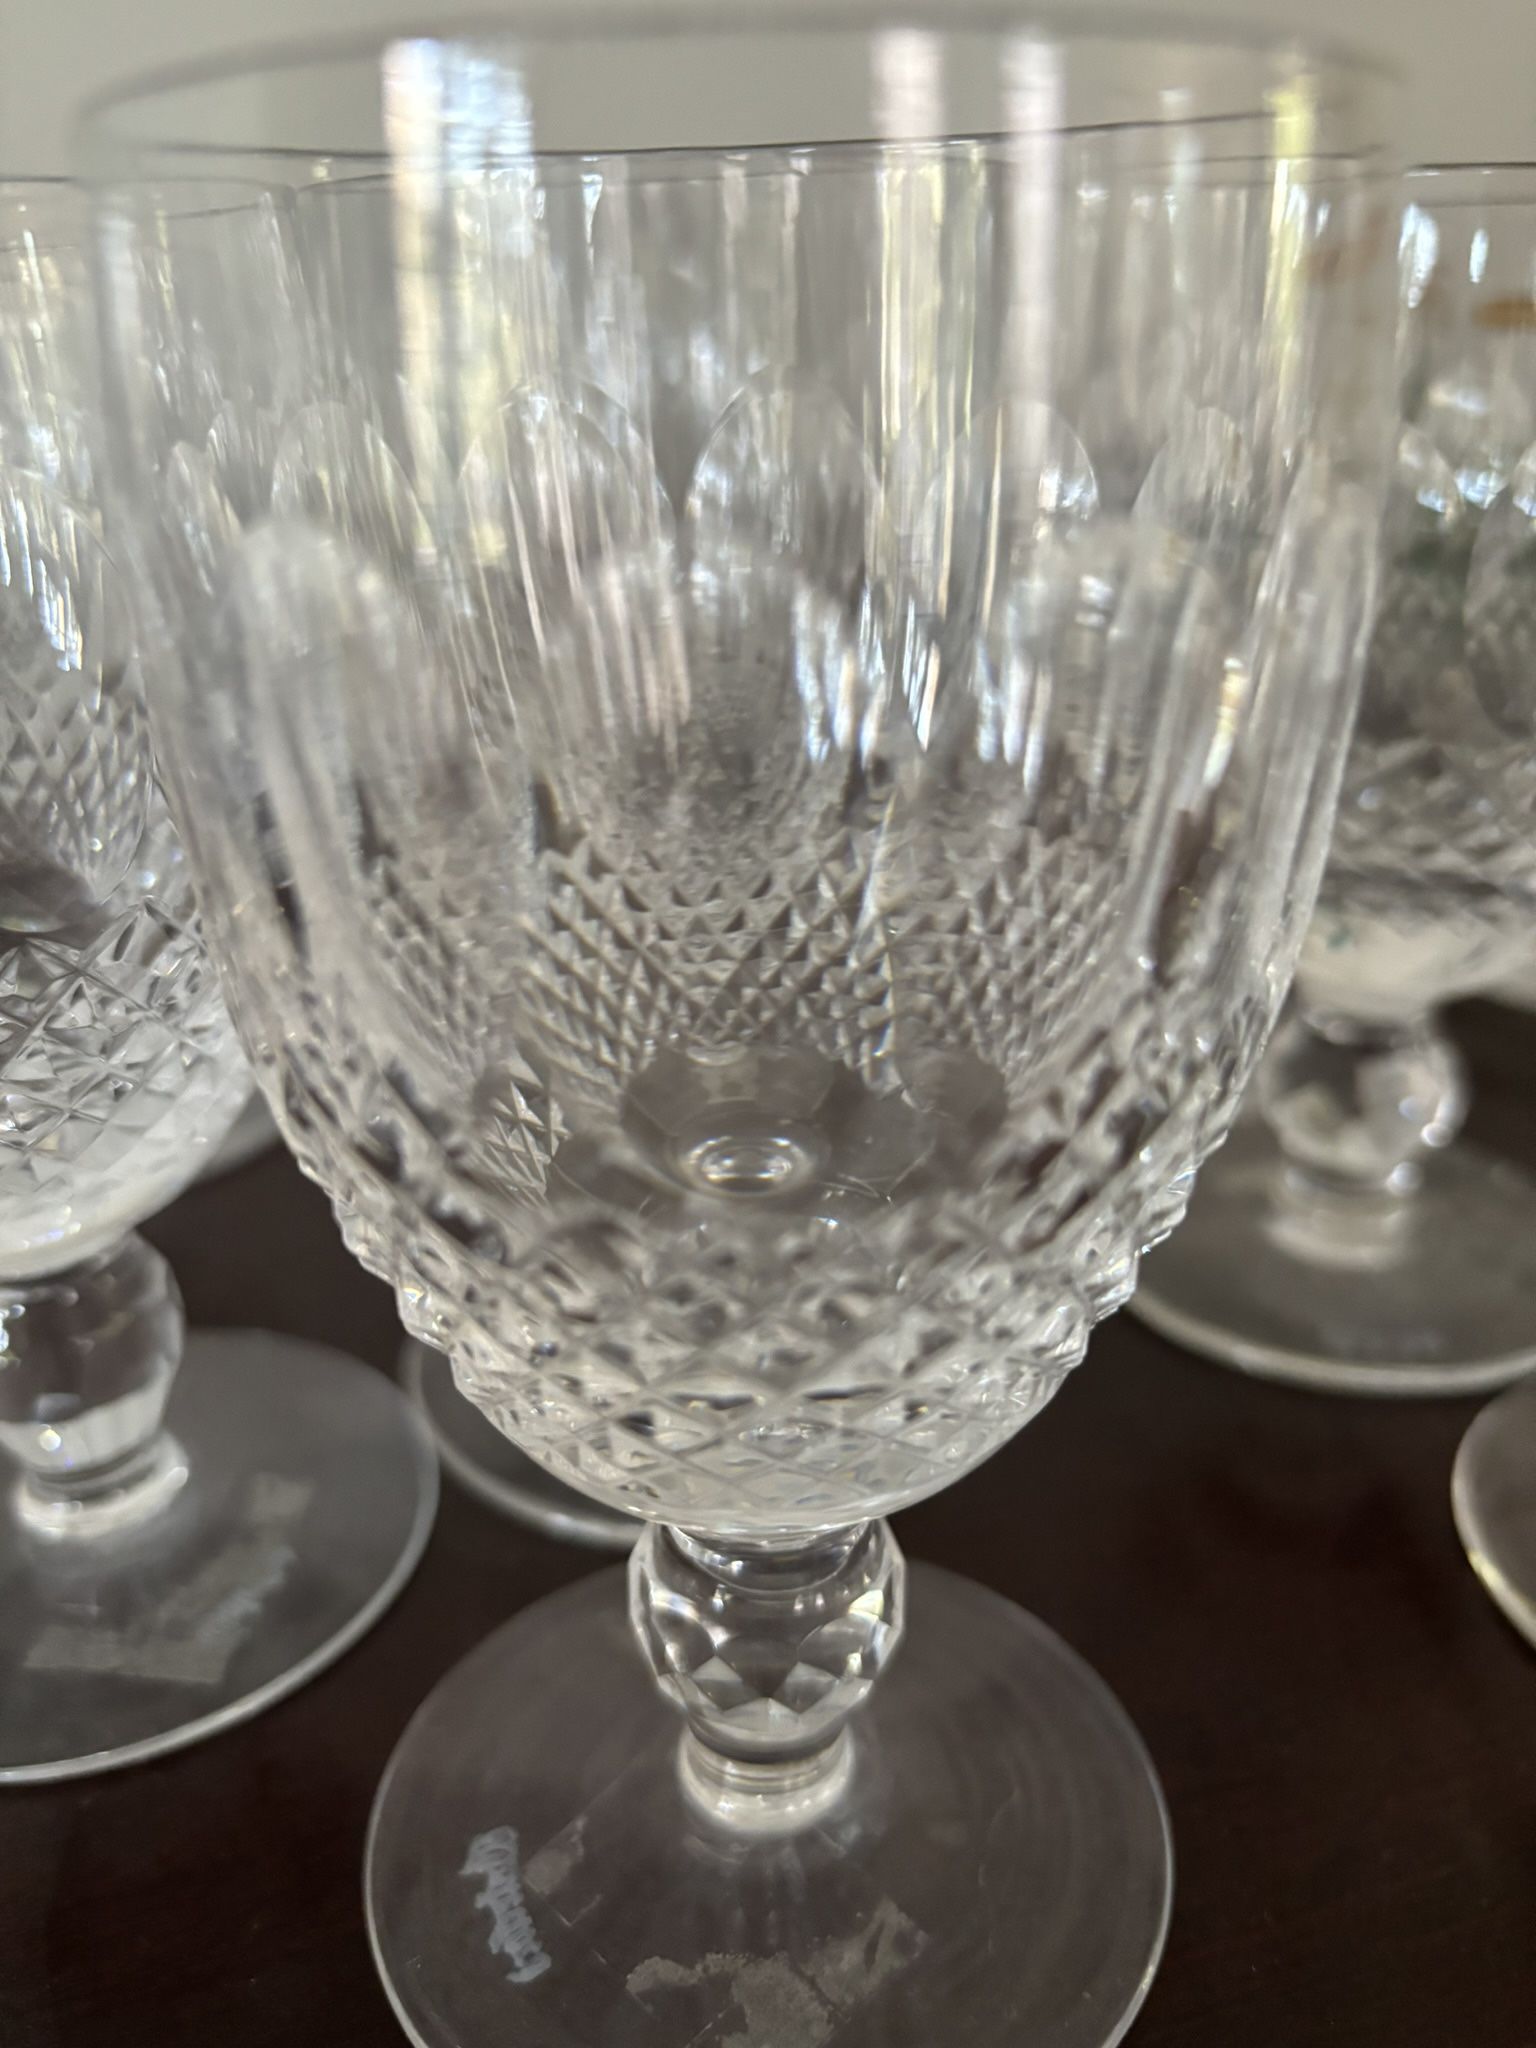 NEVER BEEN USED -  WATERFORD CLARET WINE GLASSES “COLLEEN’ VINTAGE SET OF 8